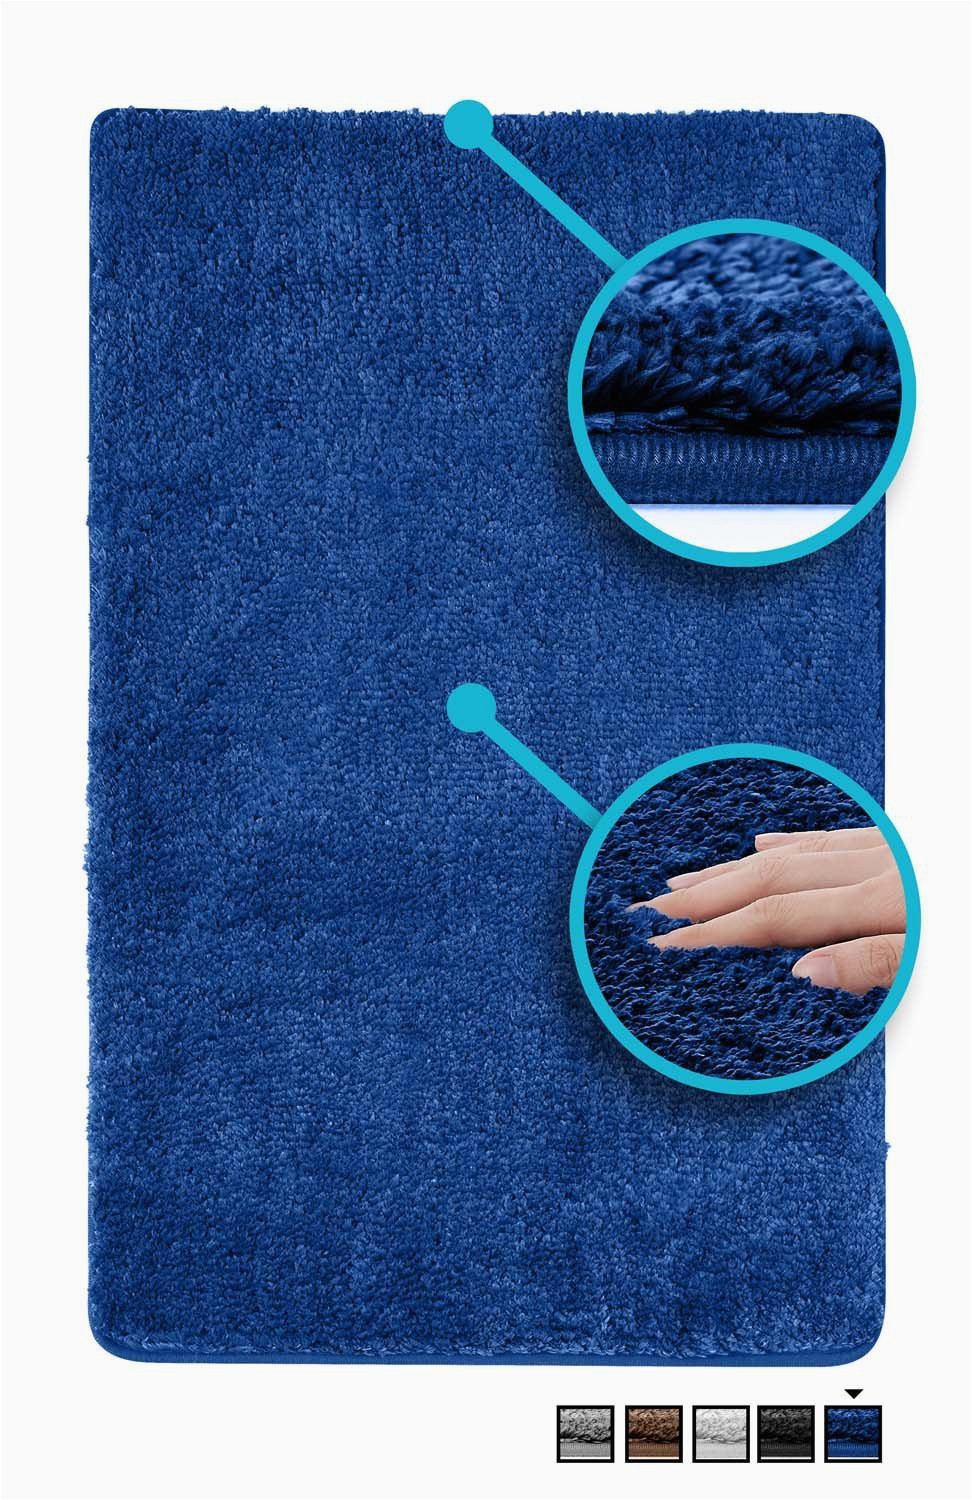 Bathroom Rugs Non Slip Backing Luxe Rug Luxuriously Plush Microfiber Bathroom Rugs Non Slip Backing 19 5 X 31 5 In